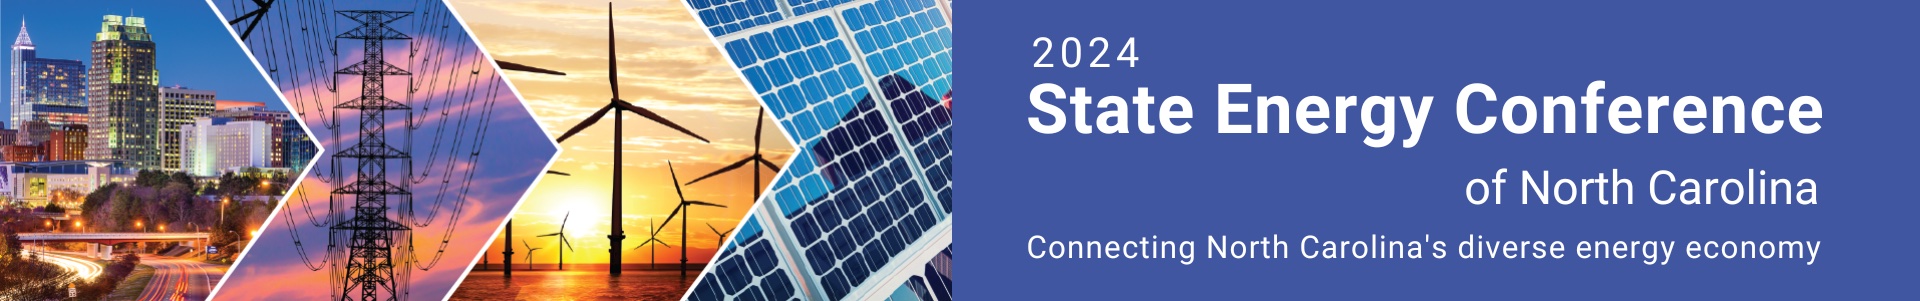 2024 State Energy Conference of North Carolina: